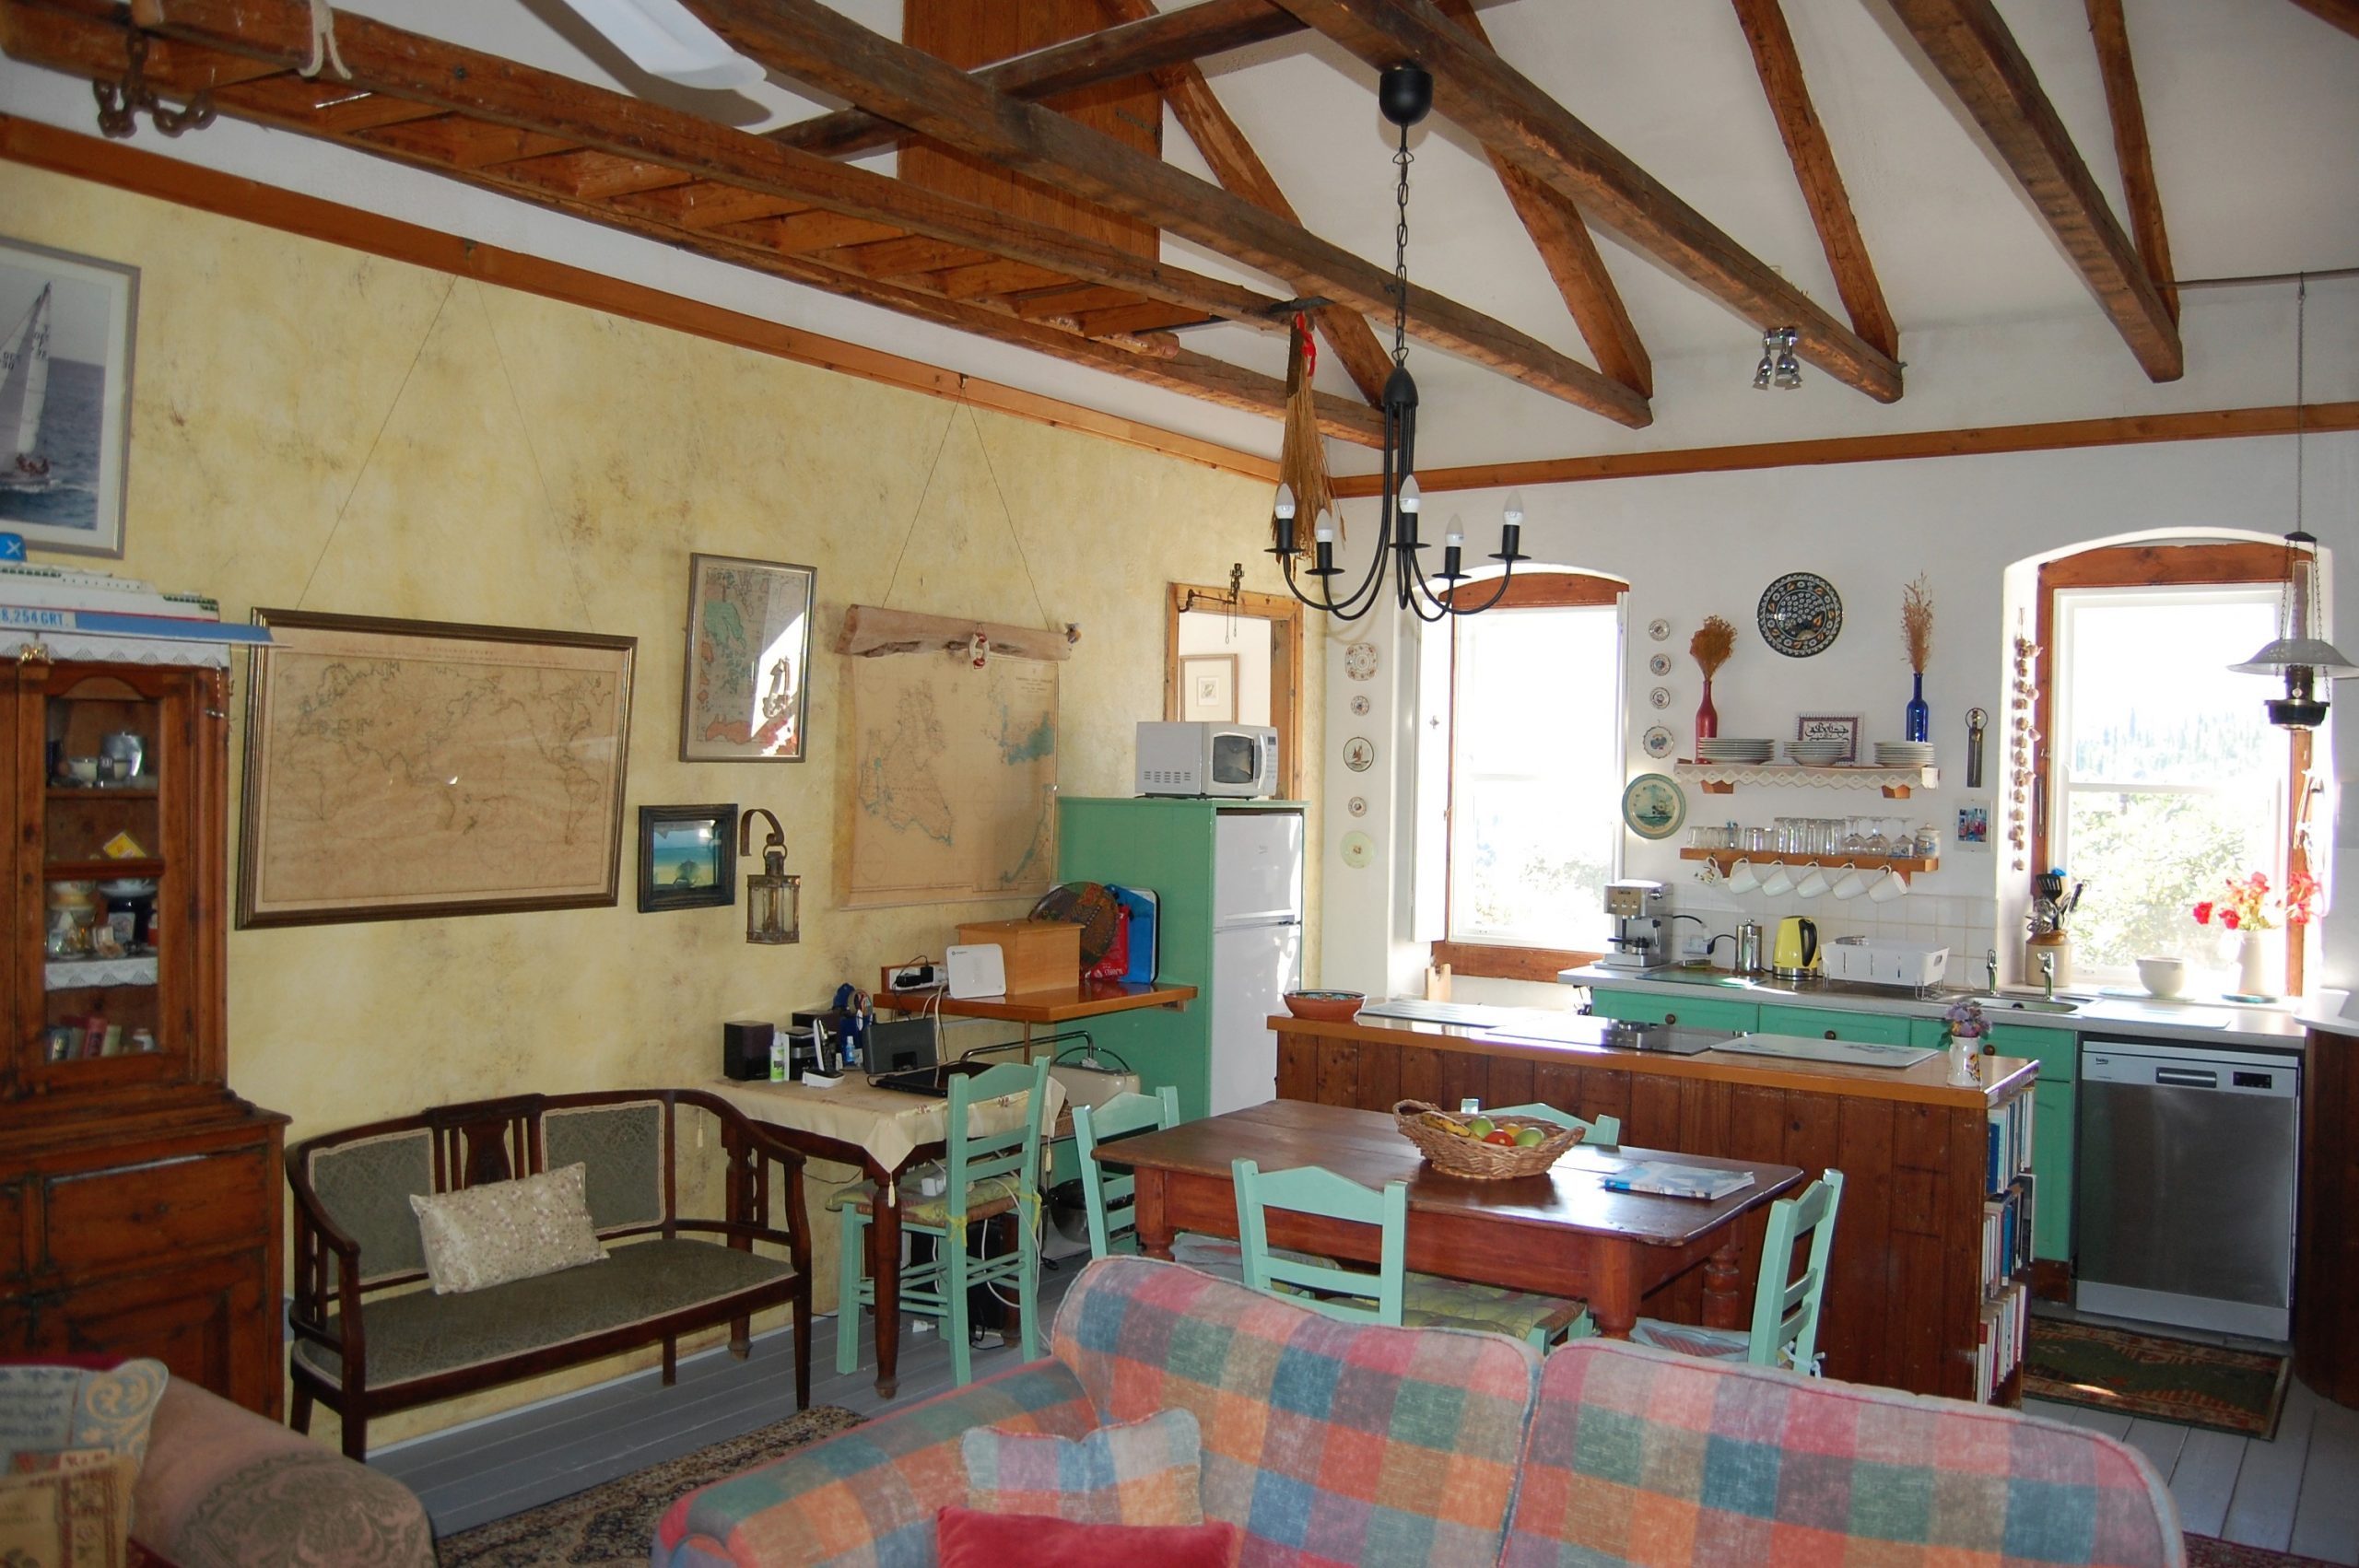 Living room / Kitchen of house for sale Ithaca Greece, Lahos